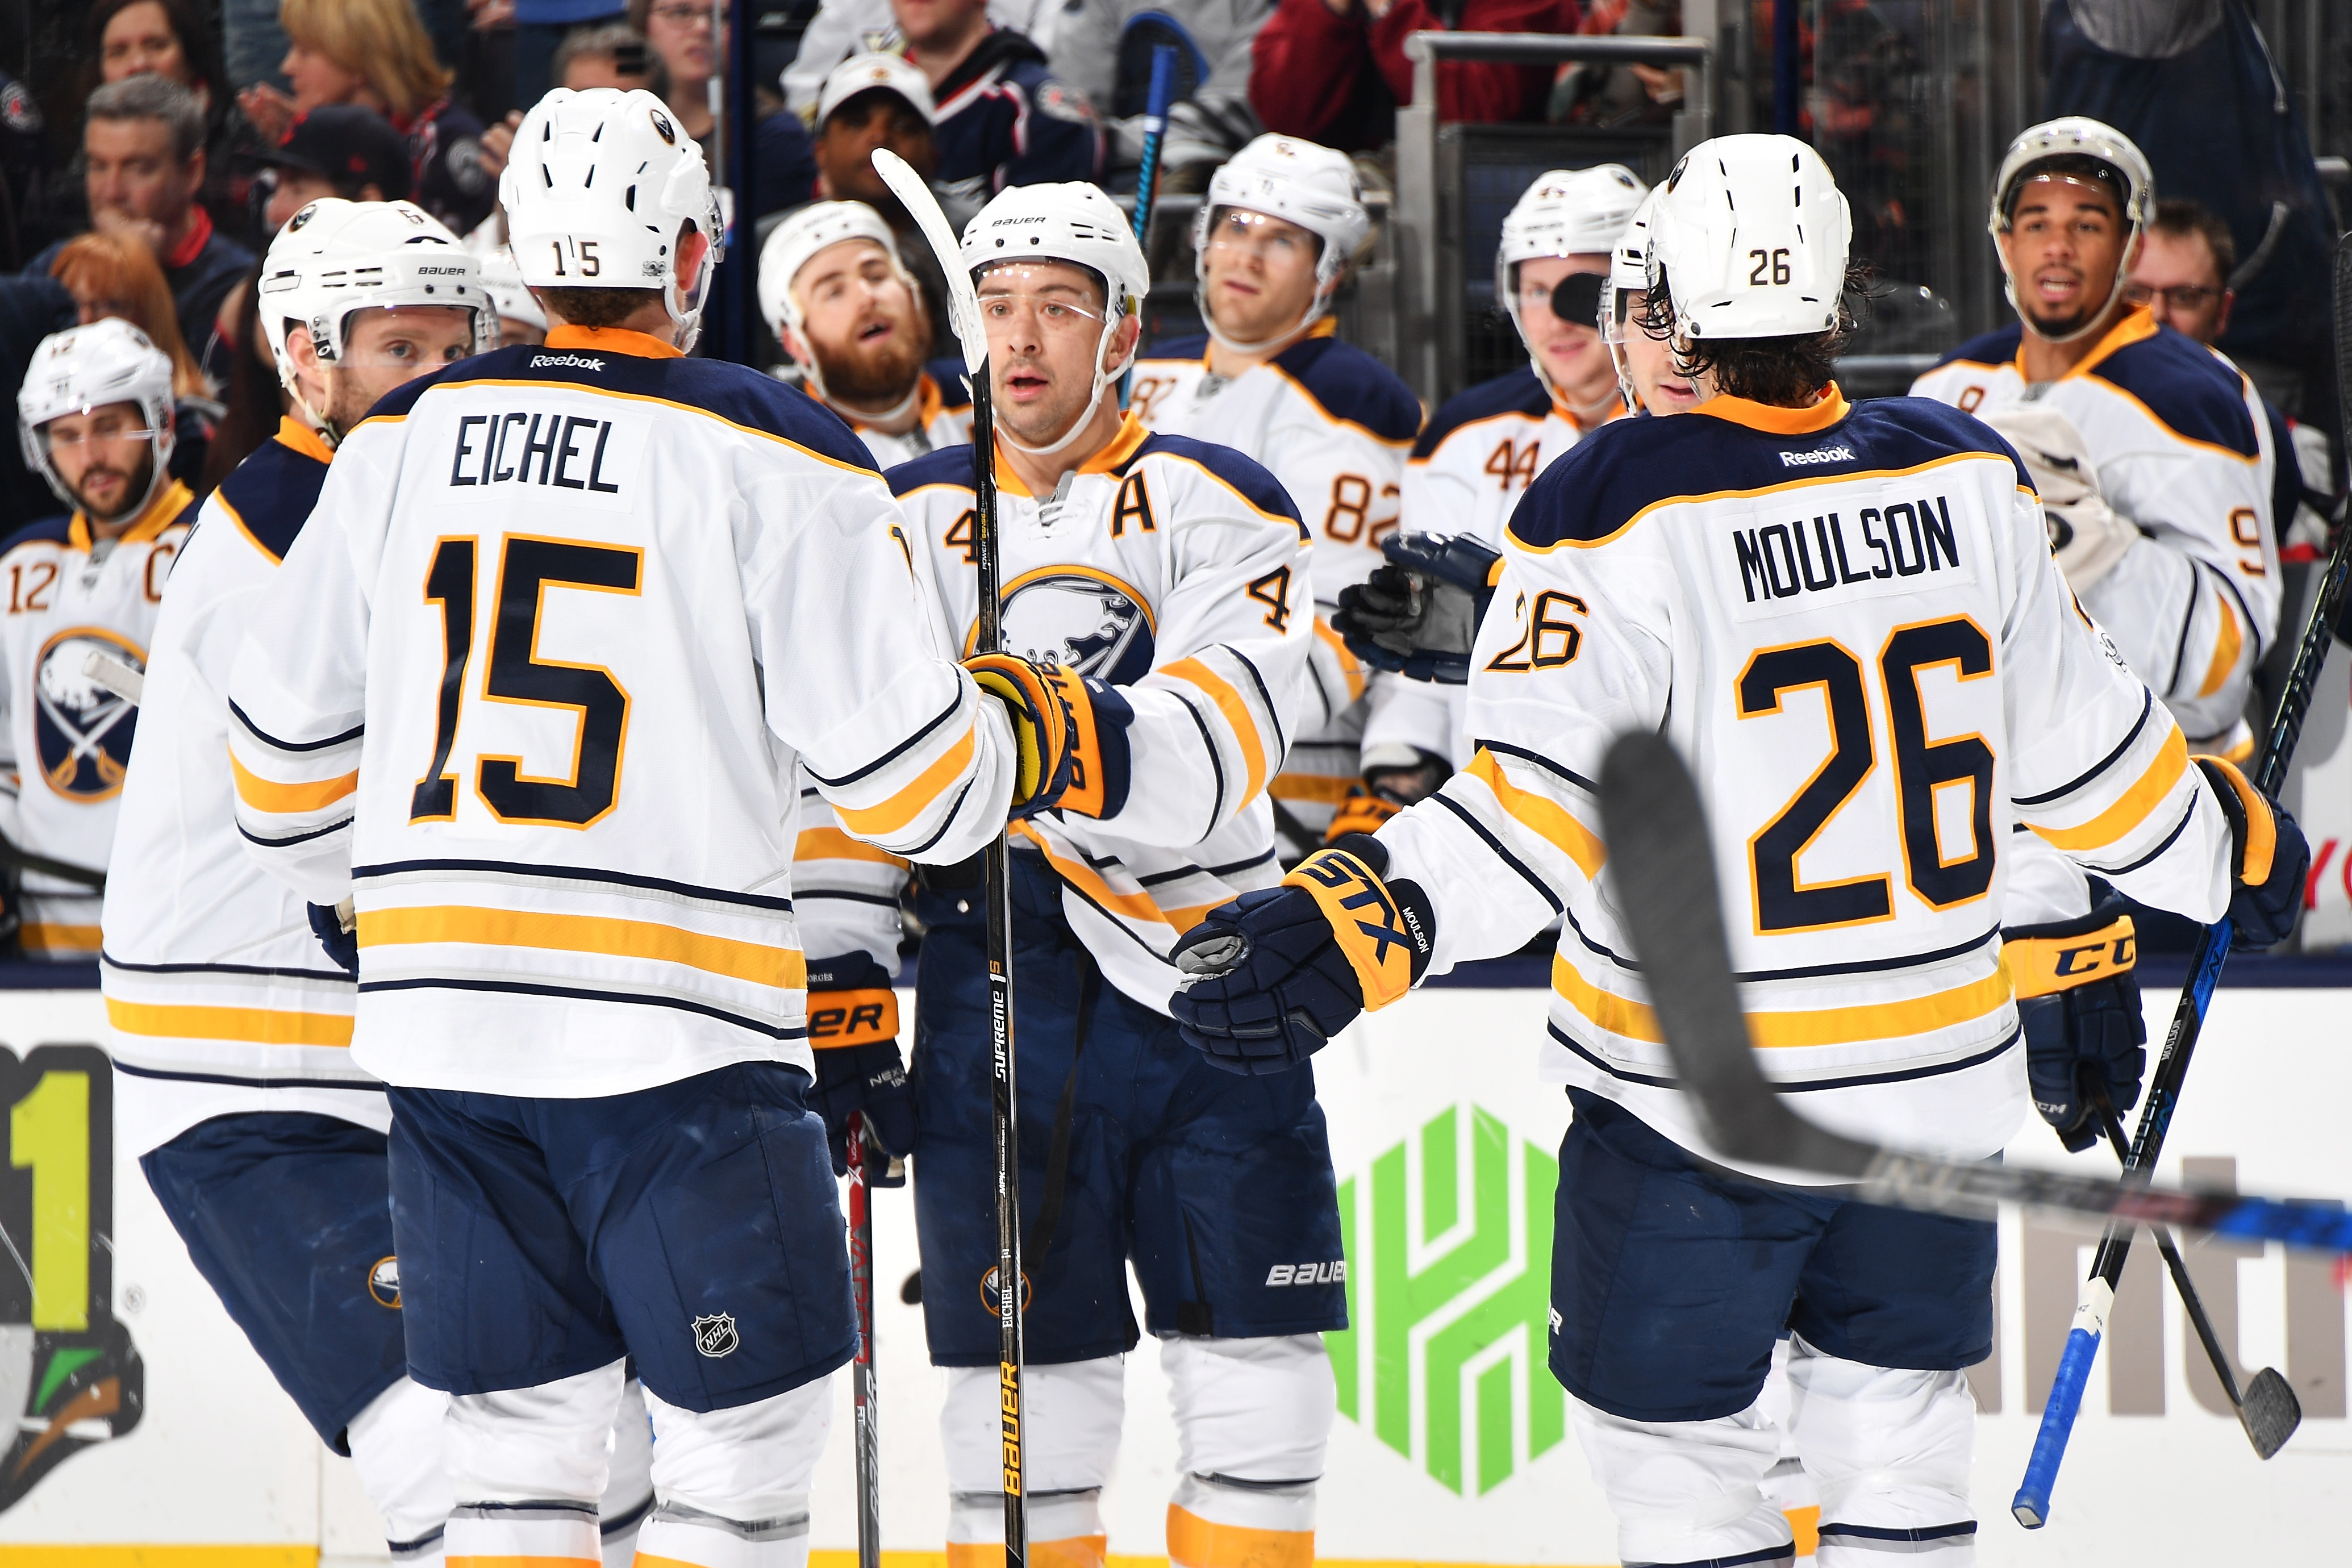 COLUMBUS, OH - MARCH 10: Josh Gorges #4 of the Buffalo Sabres celebrates his second period goal with teammates Cody Franson #6, Jack Eichel #15 and Matt Moulson #26 of the Buffalo Sabres during a game against the Columbus Blue Jackets on March 10, 2017 at Nationwide Arena in Columbus, Ohio.  (Photo by Jamie Sabau/NHLI via Getty Images)